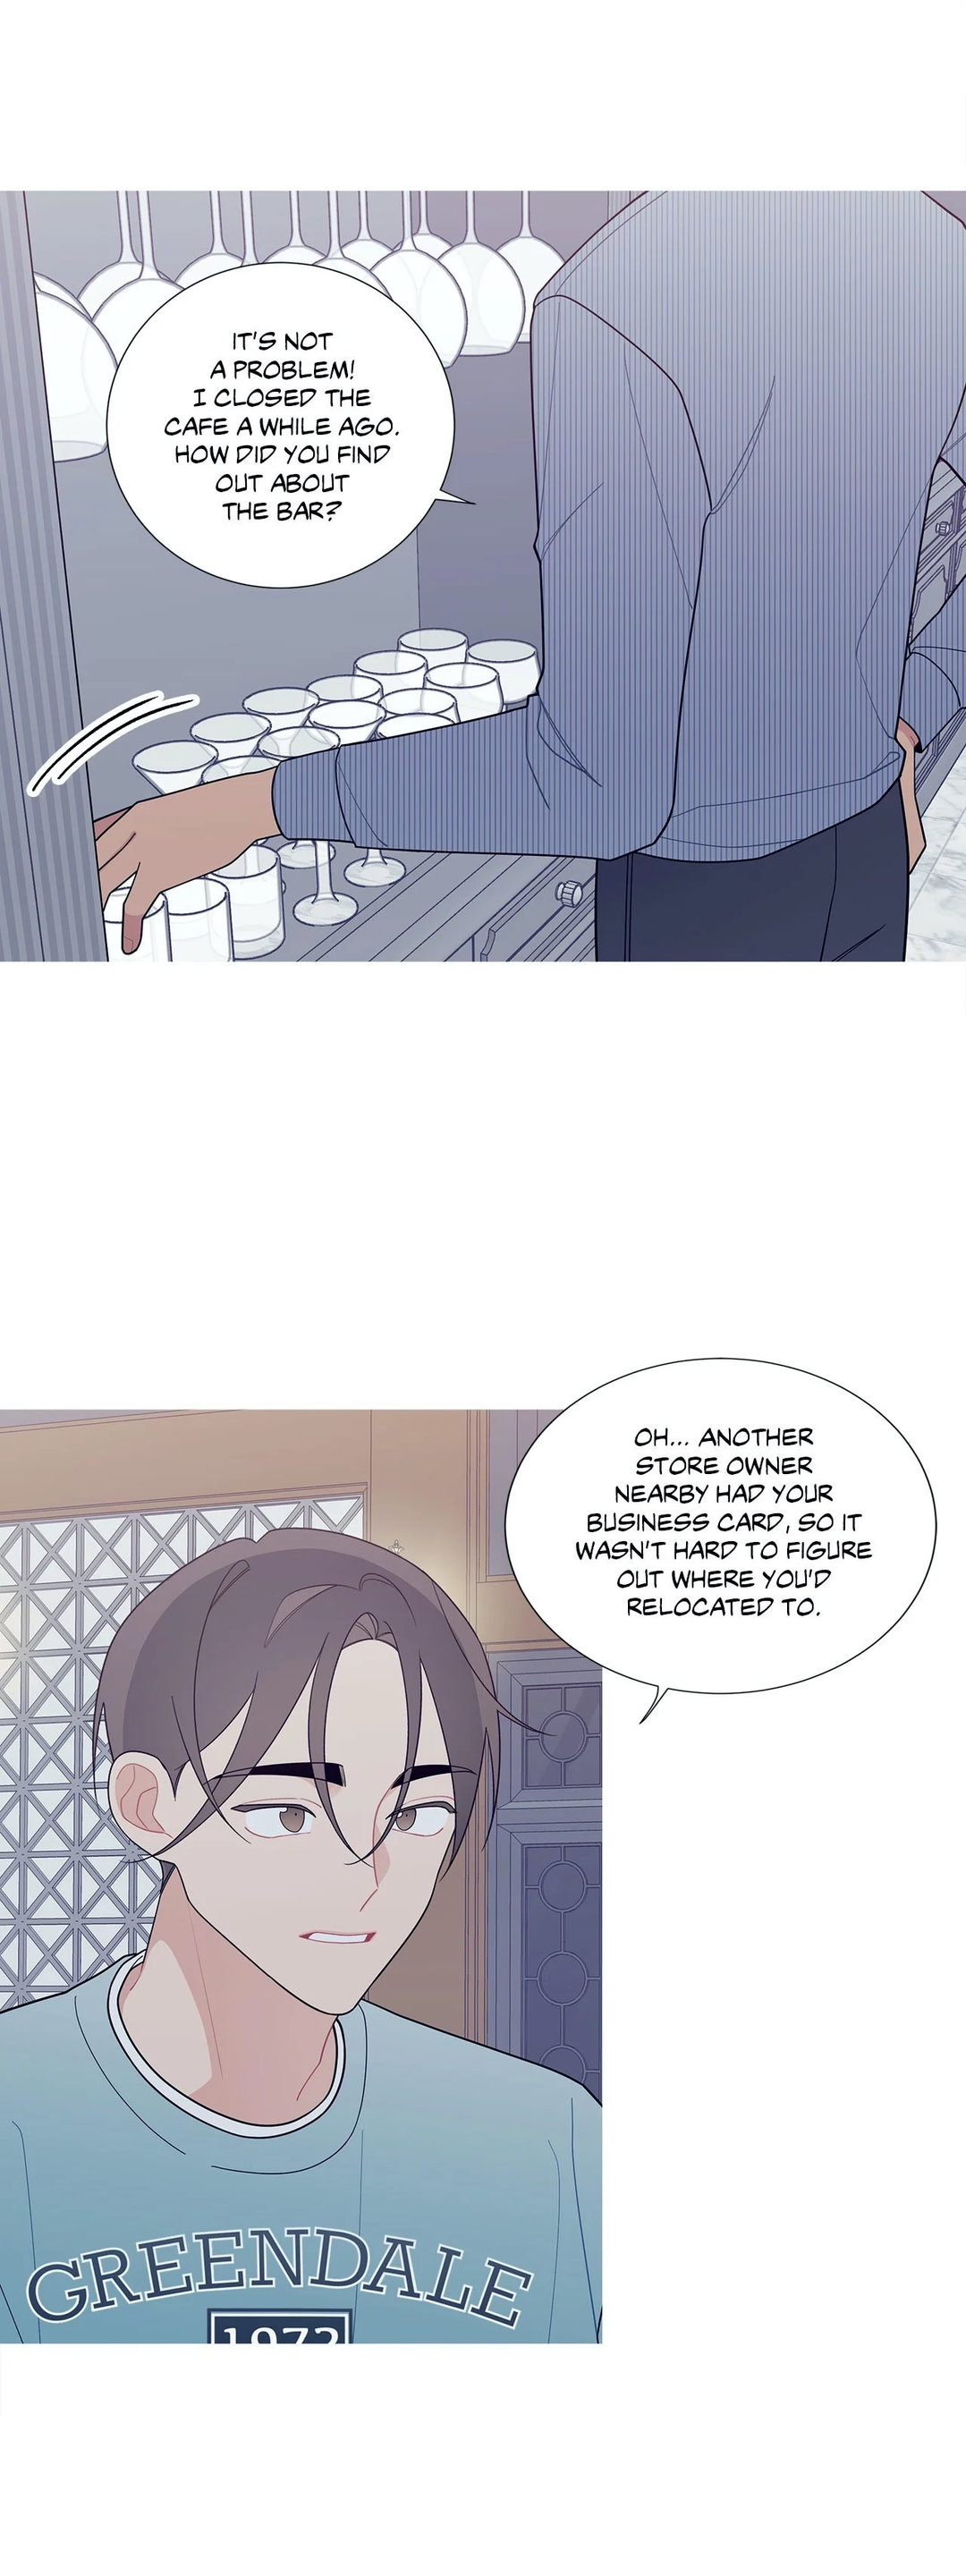 What’s Going On? - Chapter 122 Page 7